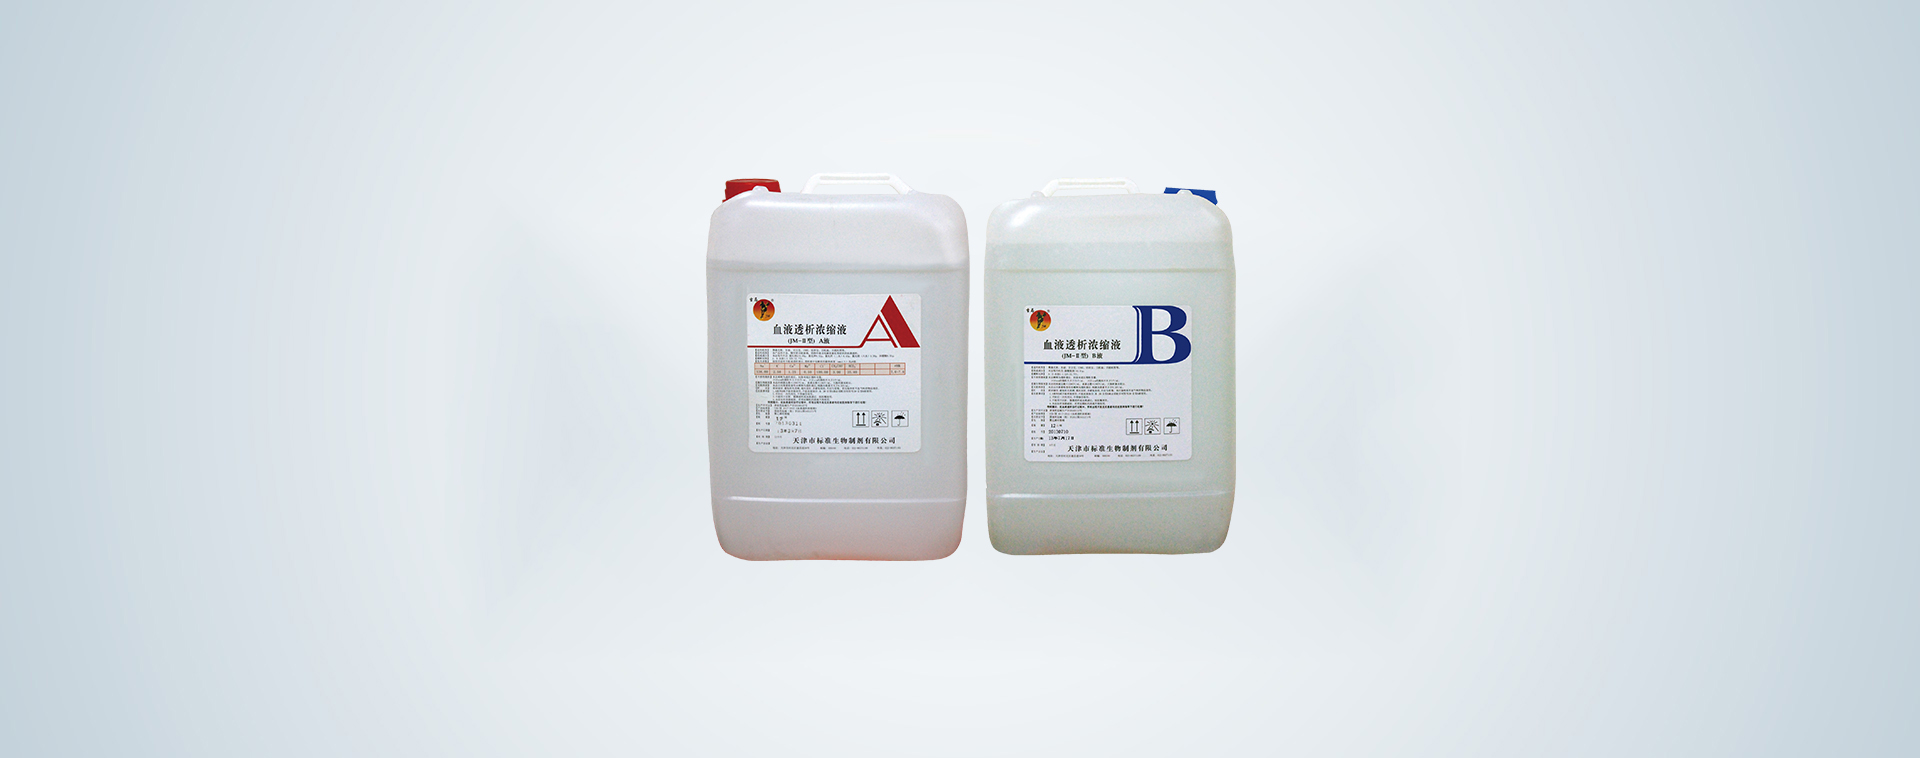 Hemodialysis Concentrate